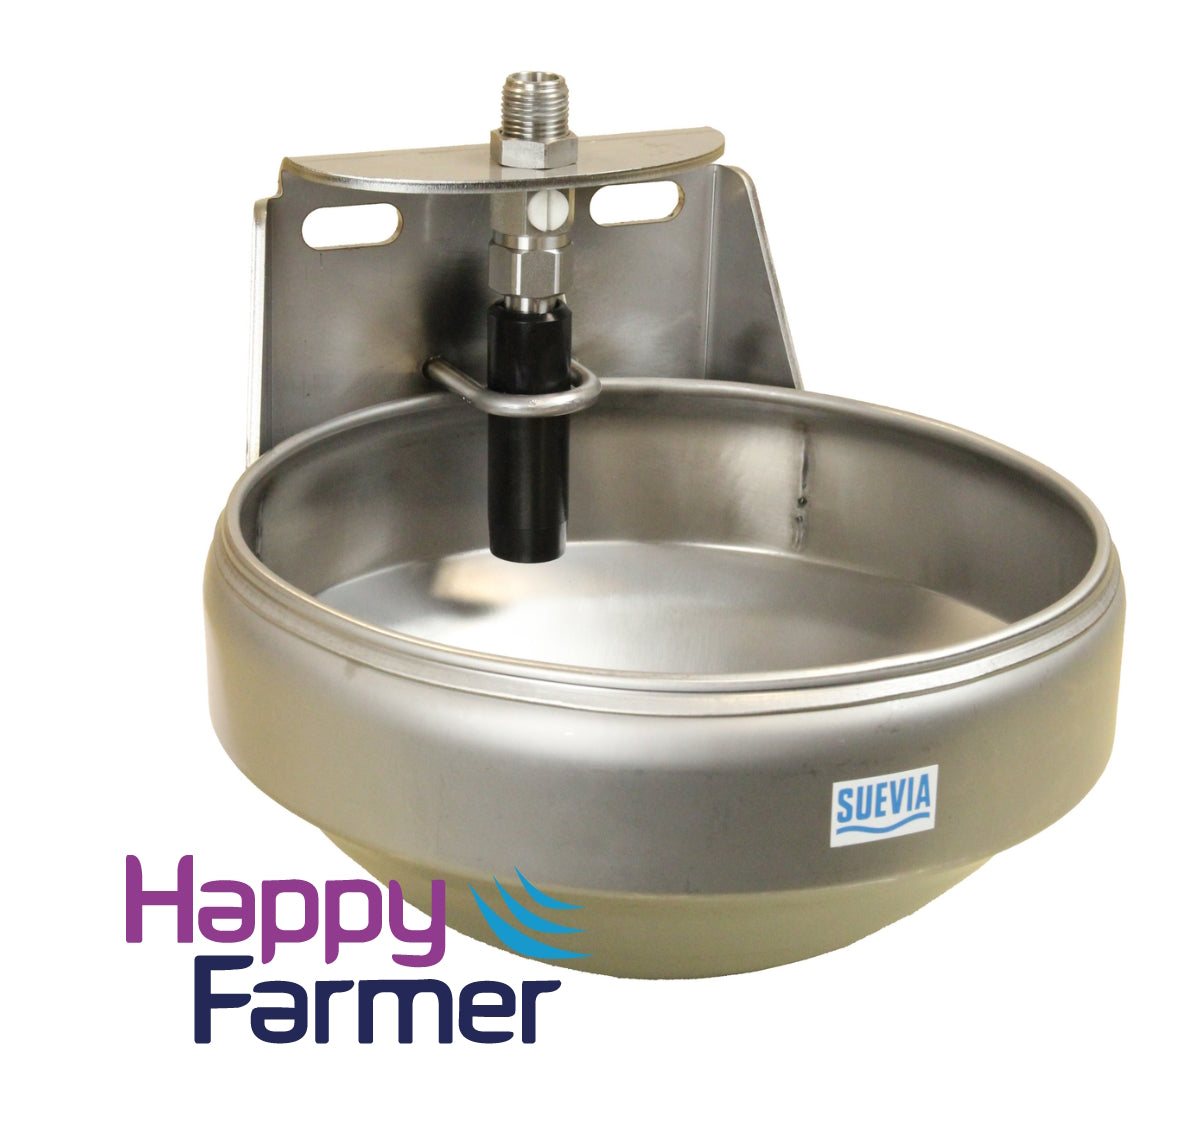 Drinking trough Model 1120 with stainless steel valve 1-2" Suevia